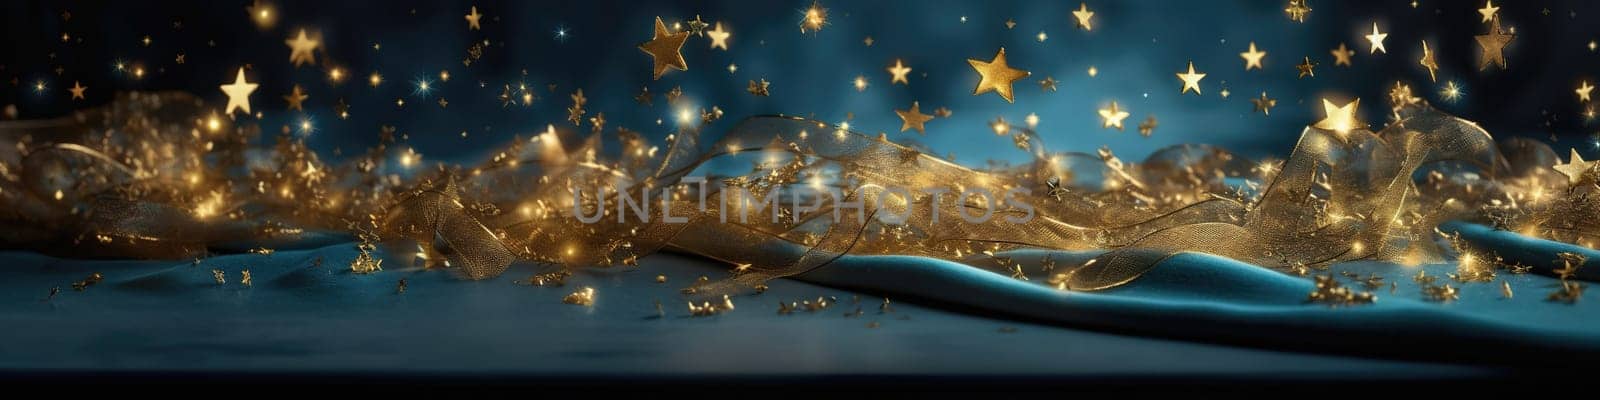 Christmas Stars And Decoratios As Abstract Panoramic Background by GekaSkr